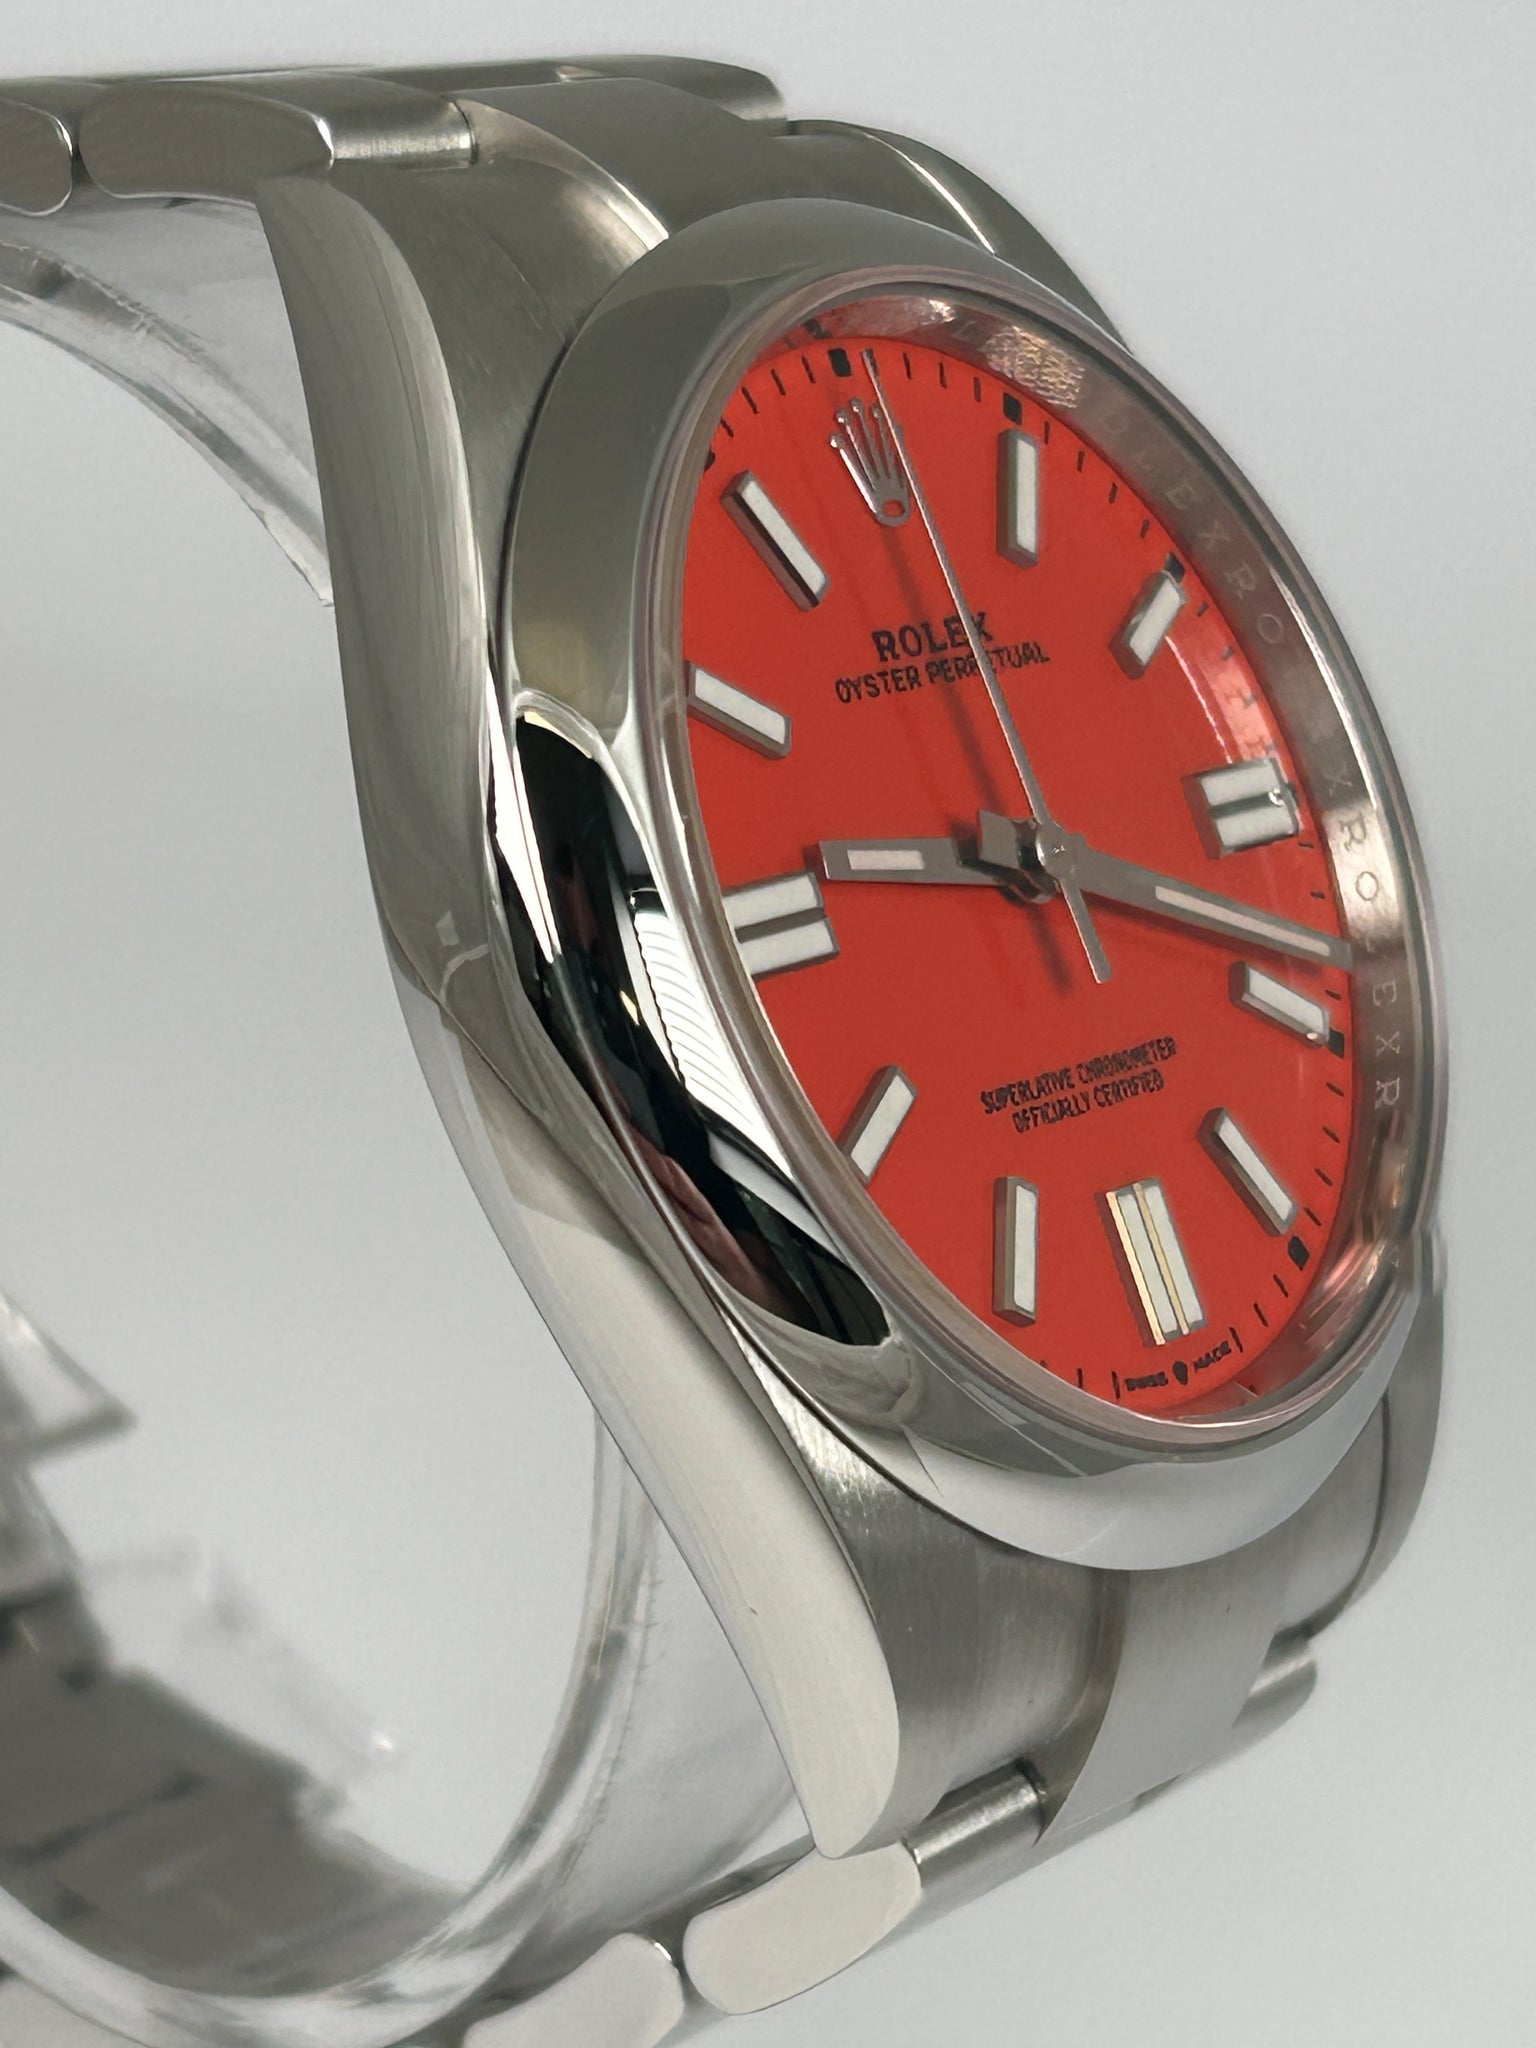 ROLEX OYSTER PERPETUAL 41MM CORAL RED 124300